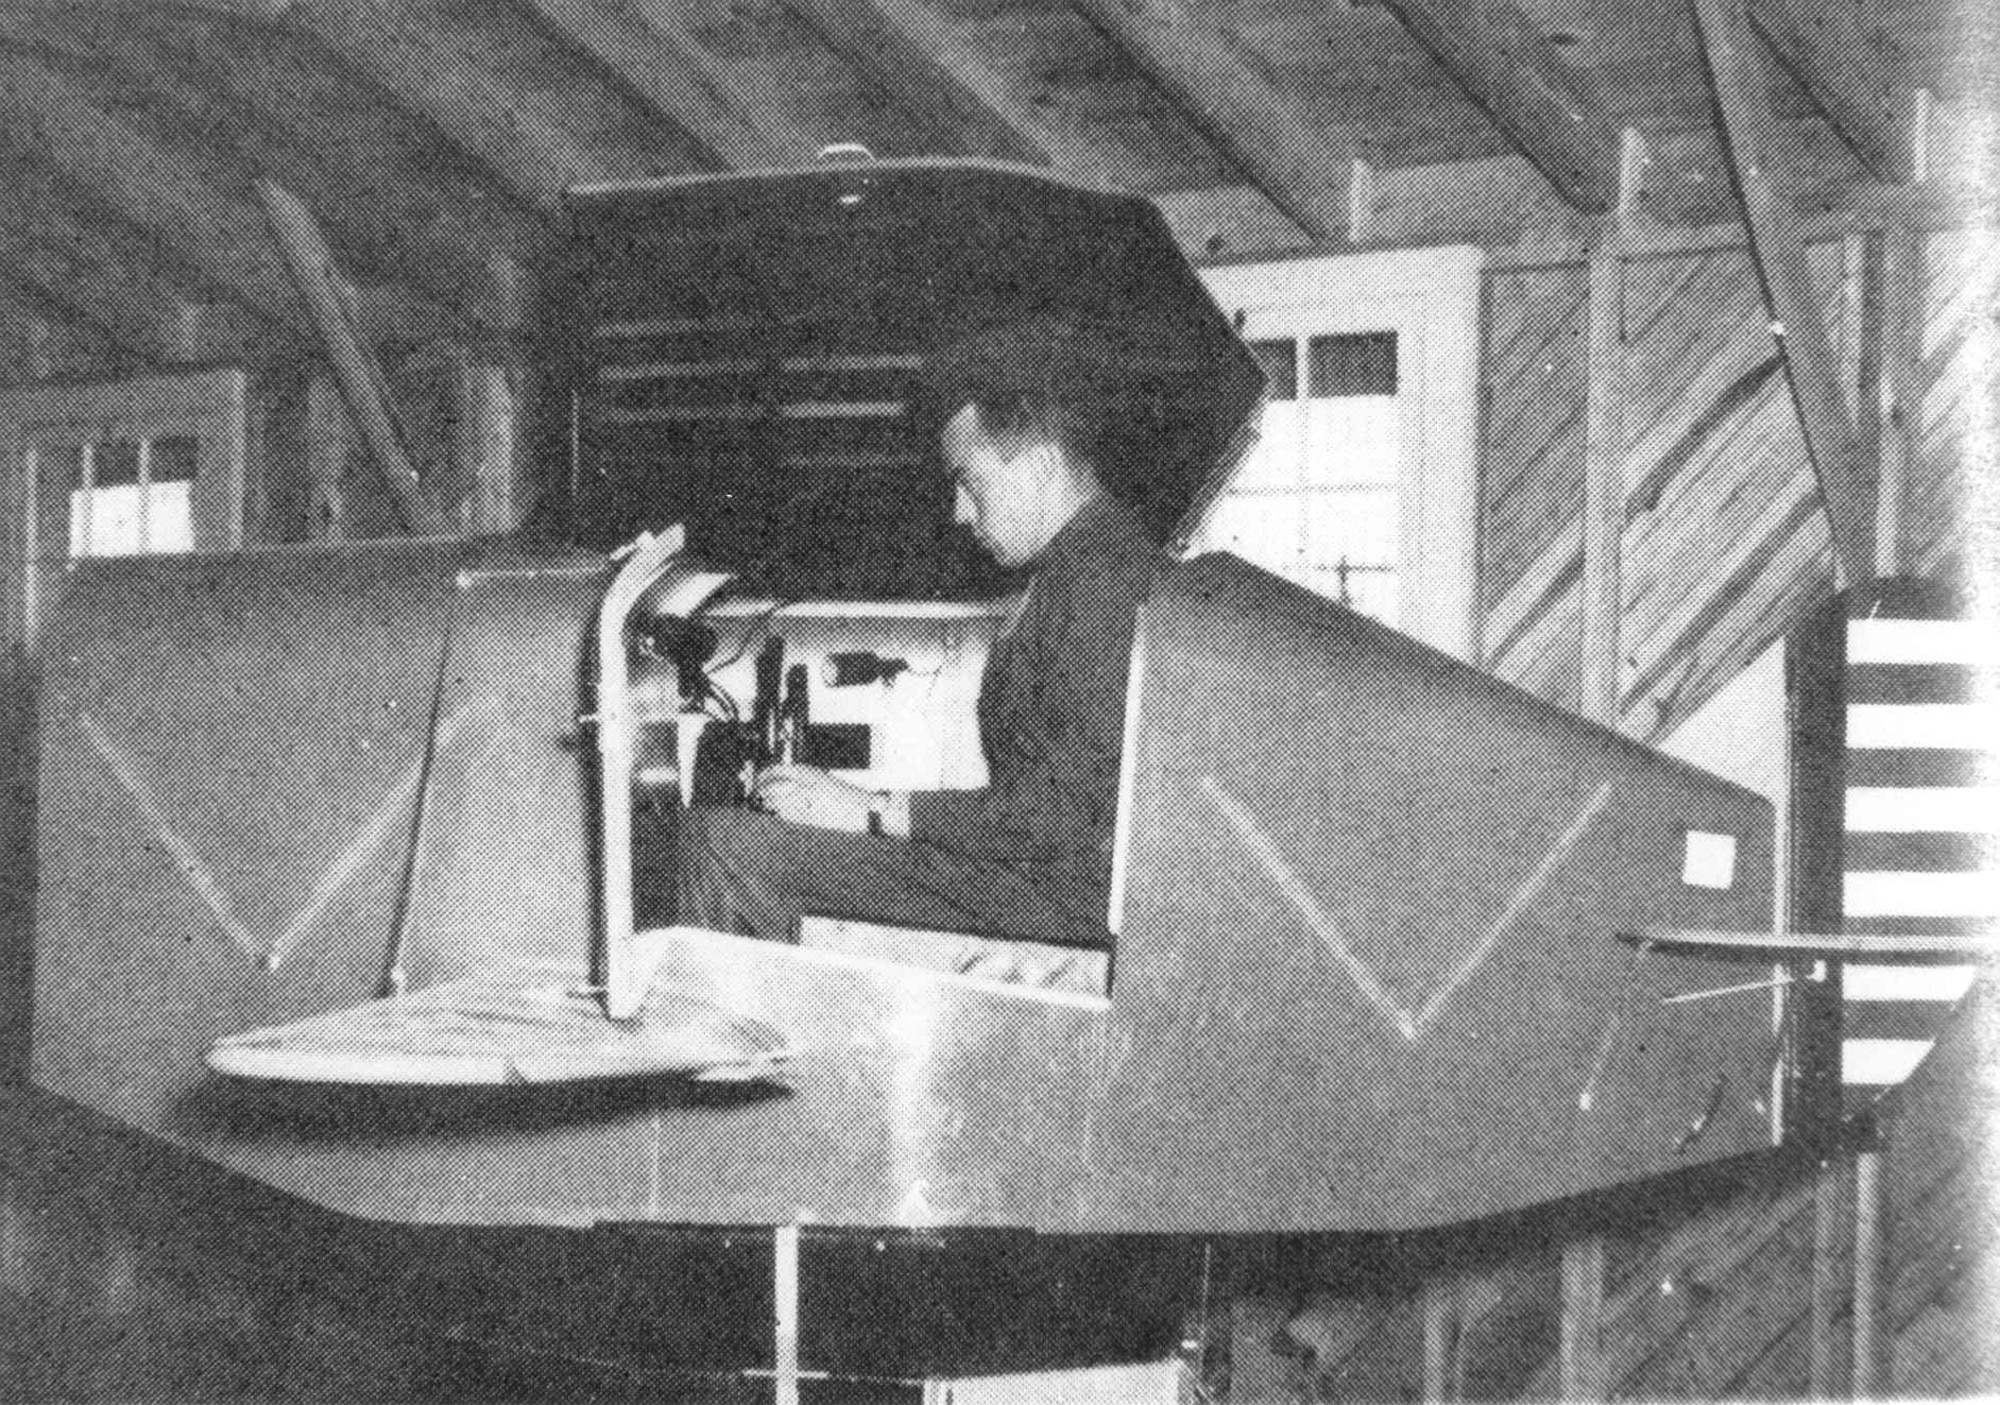 A student pilot in the WWII era trains in a Link Trainer.